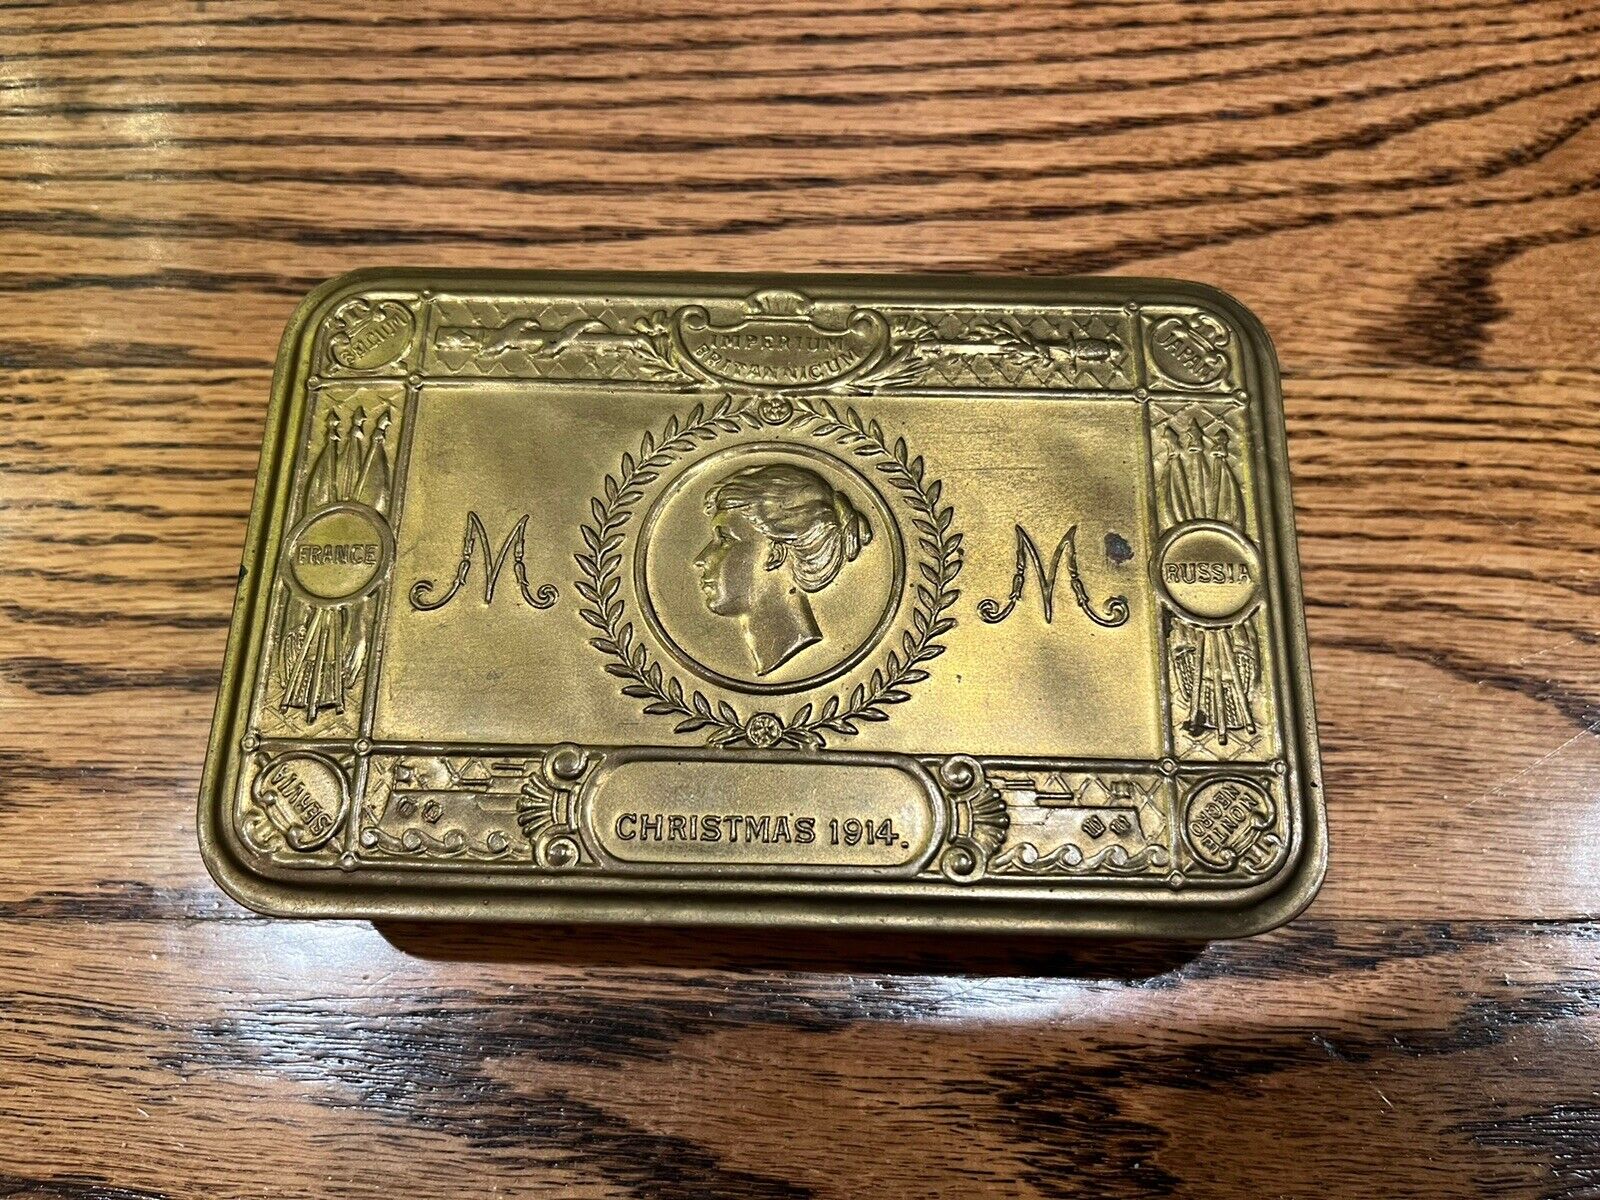 ANTIQUE 1914 ENGLISH WW1 PRINCESS MARY CHRISTMAS GIFT BRASS BOX WITH CONTENTS